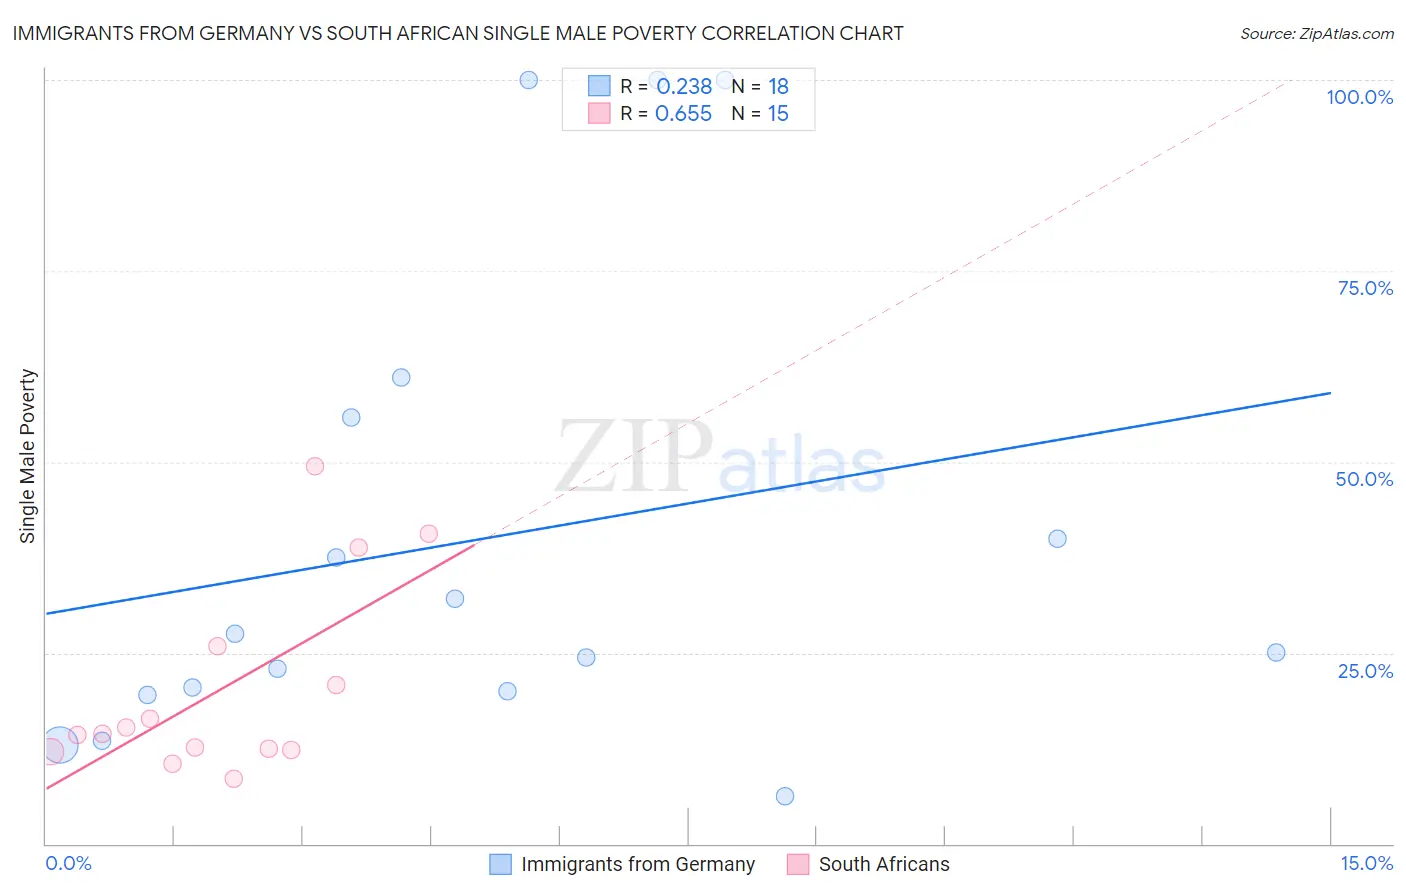 Immigrants from Germany vs South African Single Male Poverty